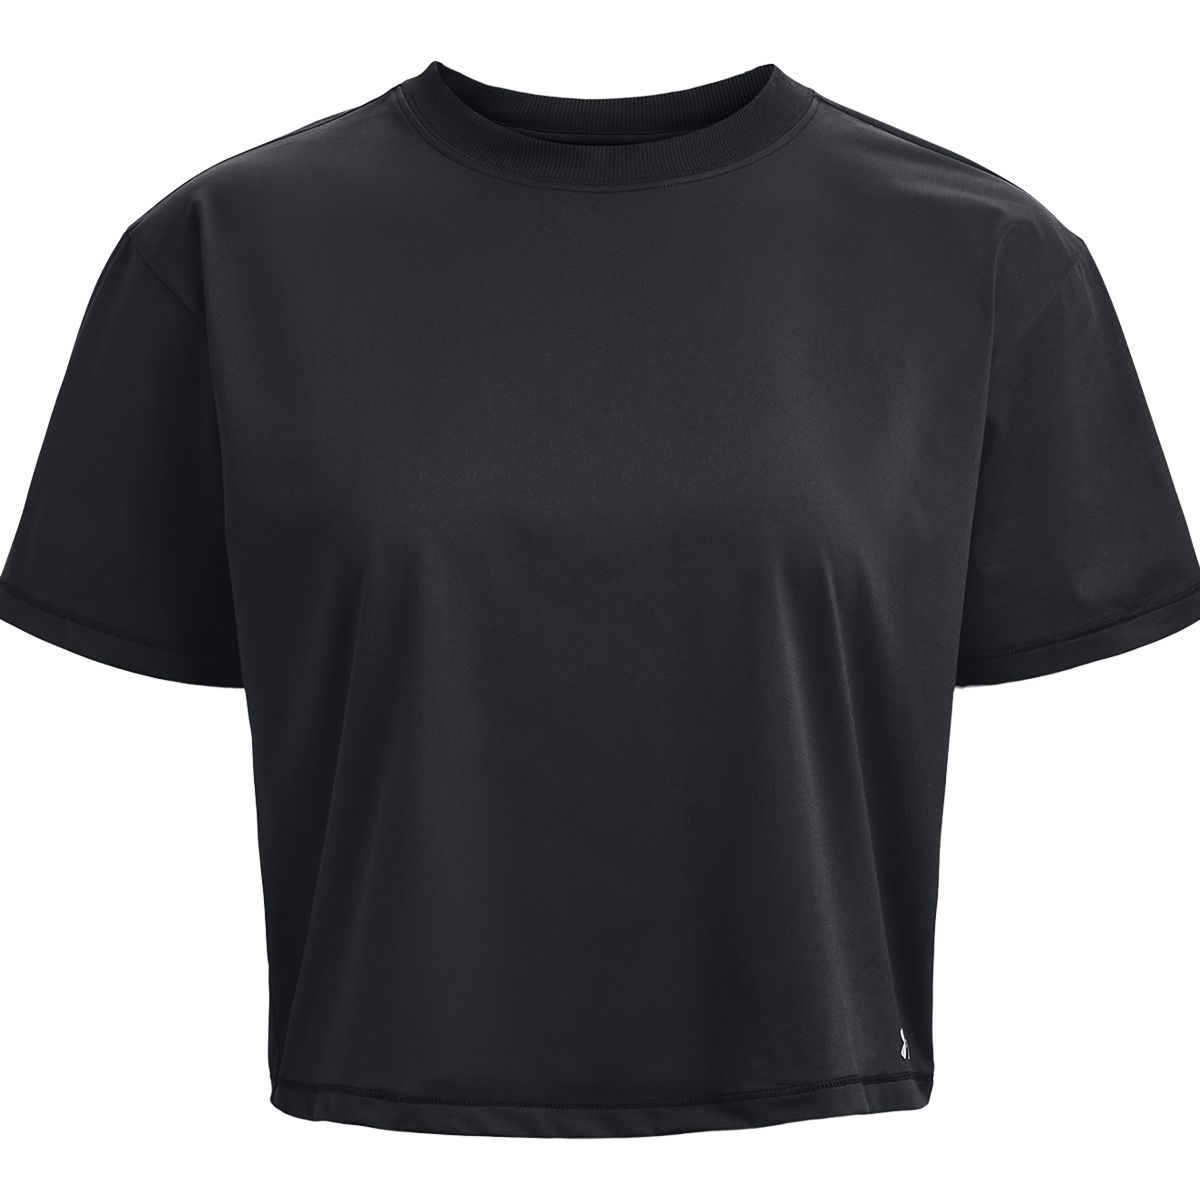 Under Armour Women's Meridian Cropped T Shirt